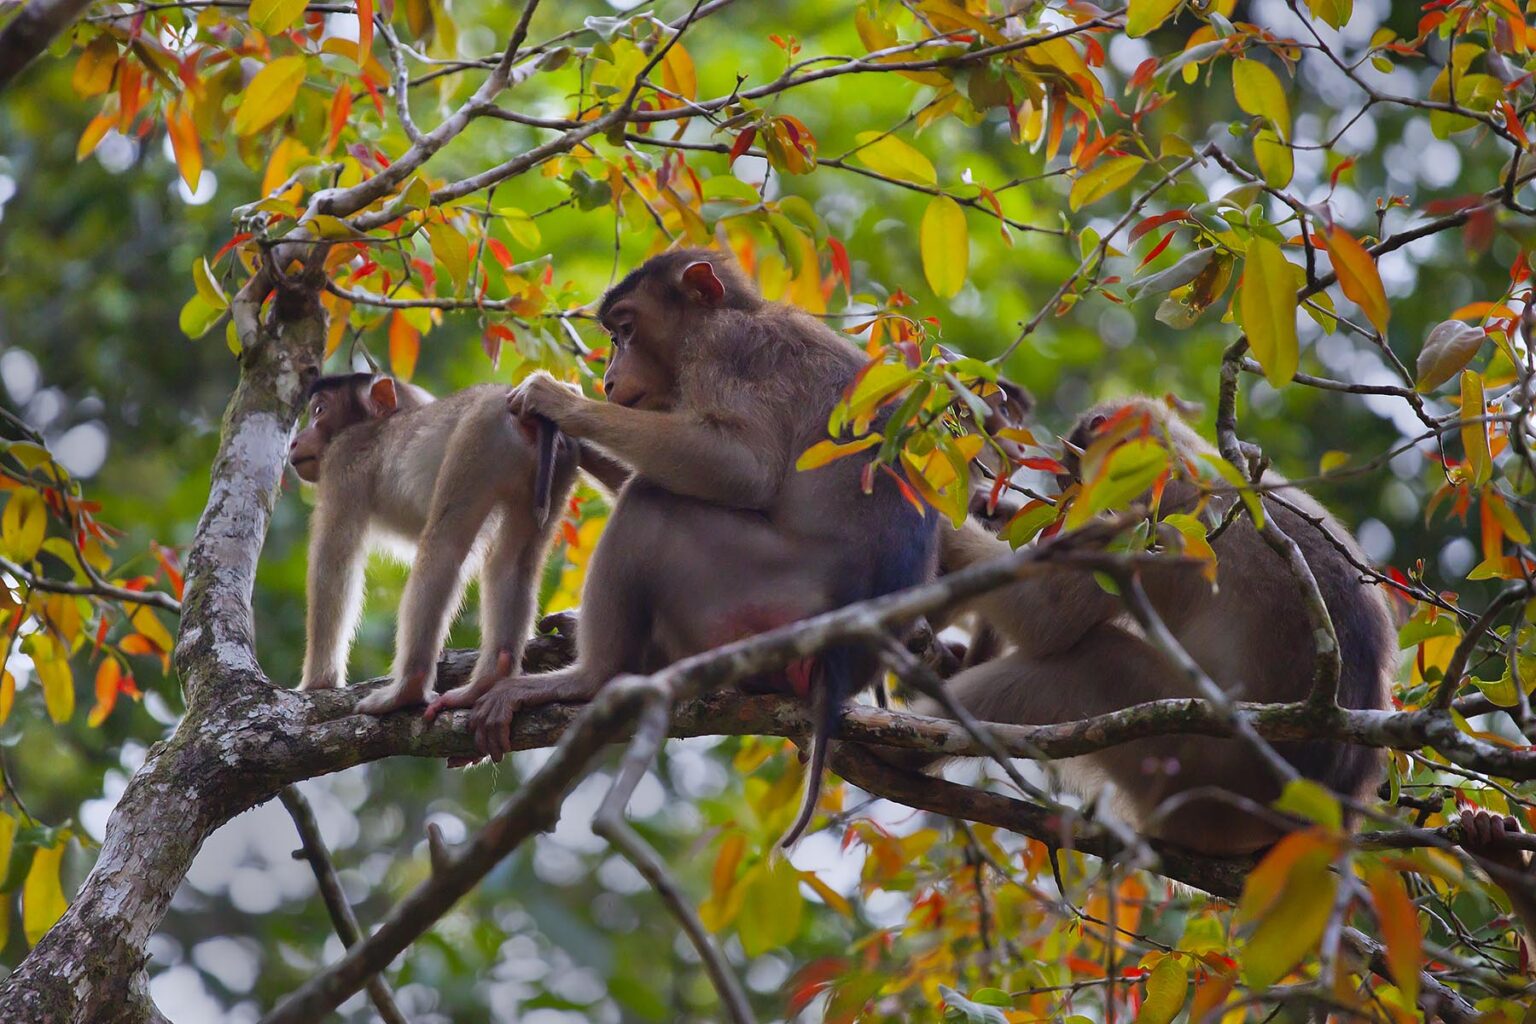 A troupe of SHORT TAILED or STUMP TAILED MACAQUES (Macaca arctoices) in the KINABATANGAN RIVER WILDLIFE SANCTUARY - SABAH, BORNEO